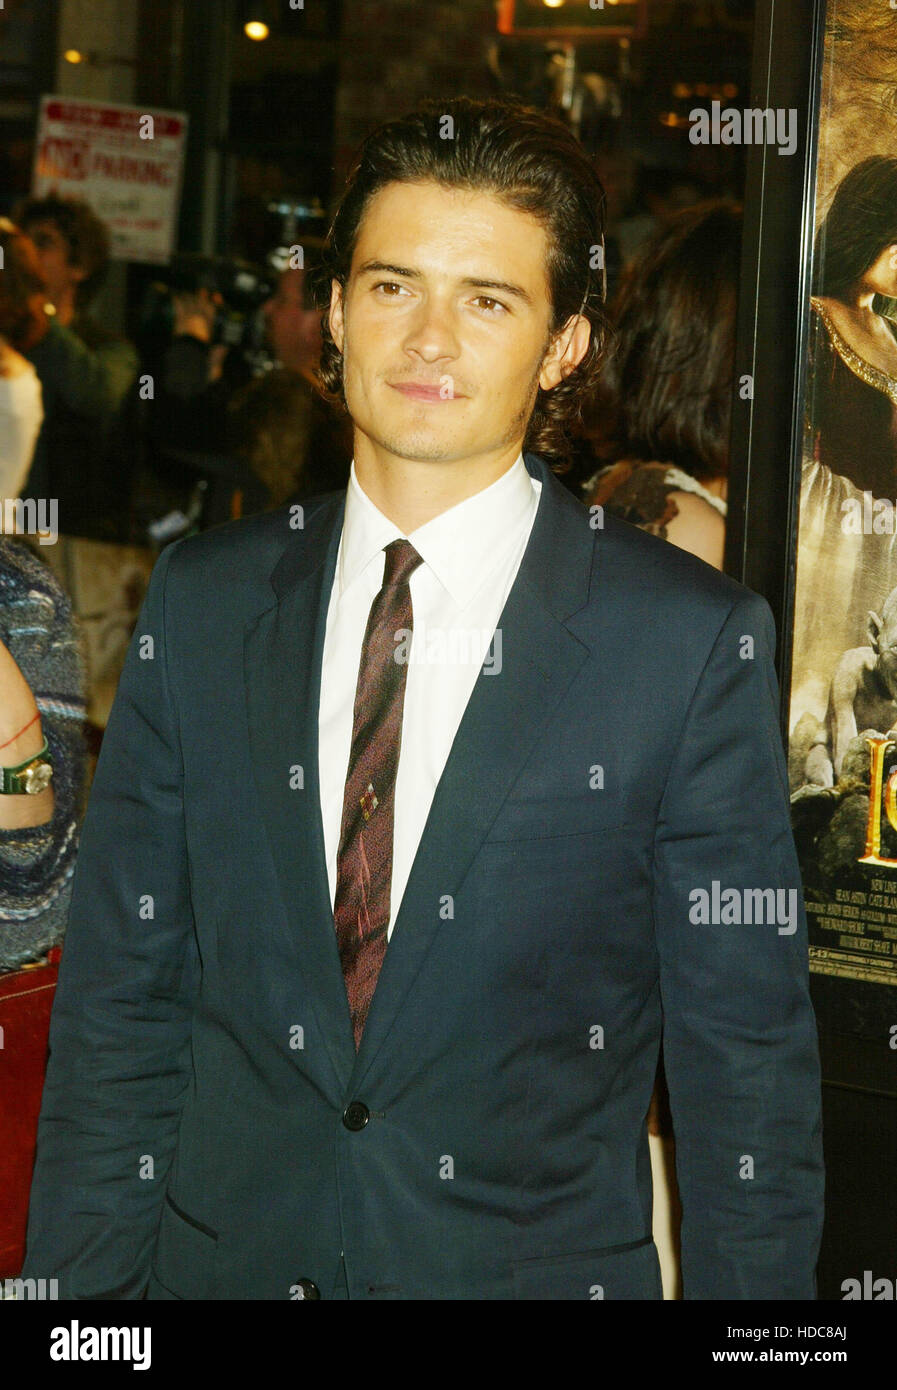 Orlando Bloom At The Premiere Of Lord Of The Rings Return Of The